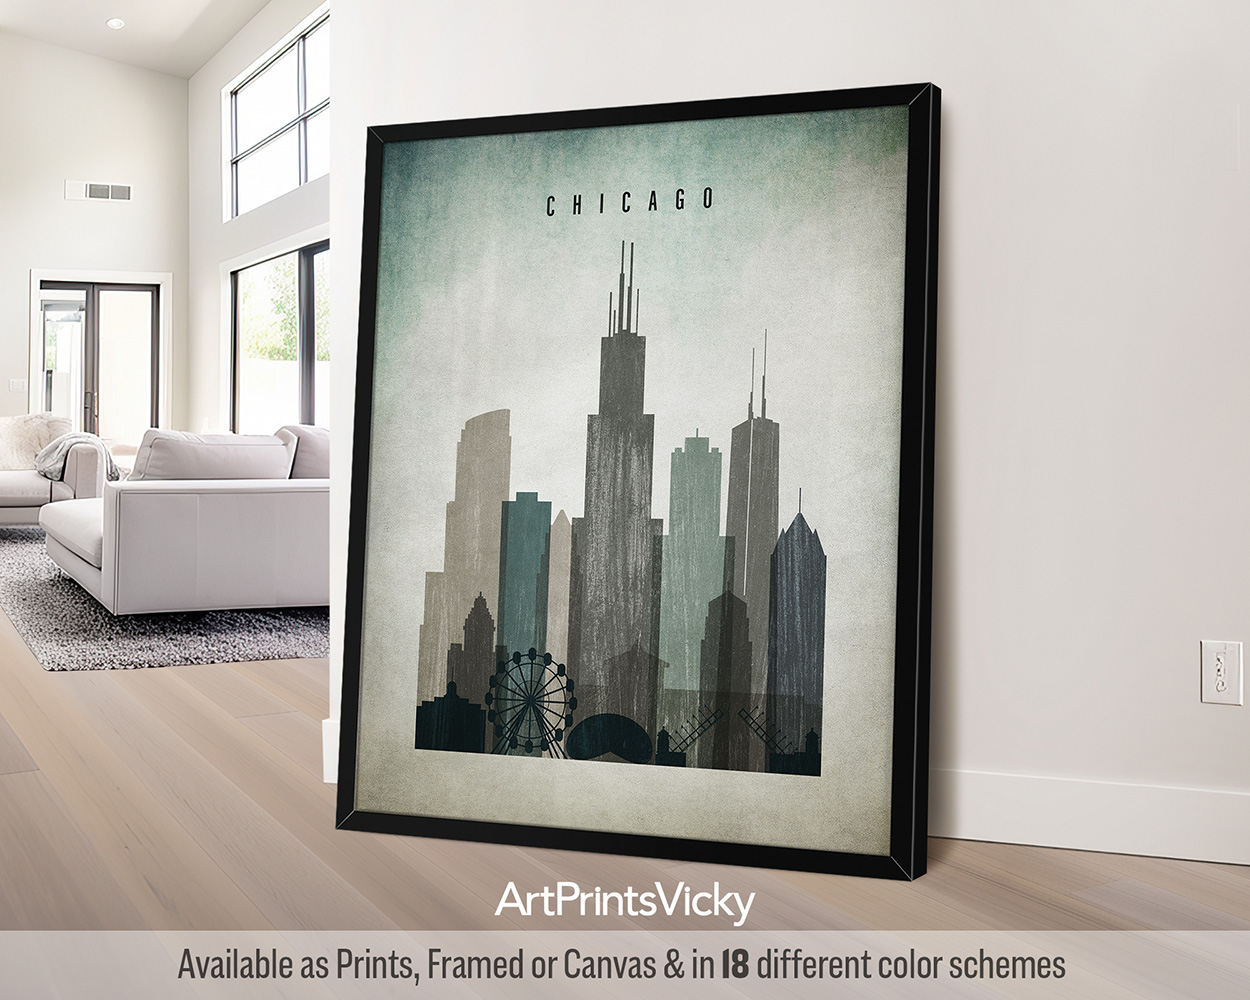 Chicago skyline poster with a heavily worn Distressed 3 style by ArtPrintsVicky